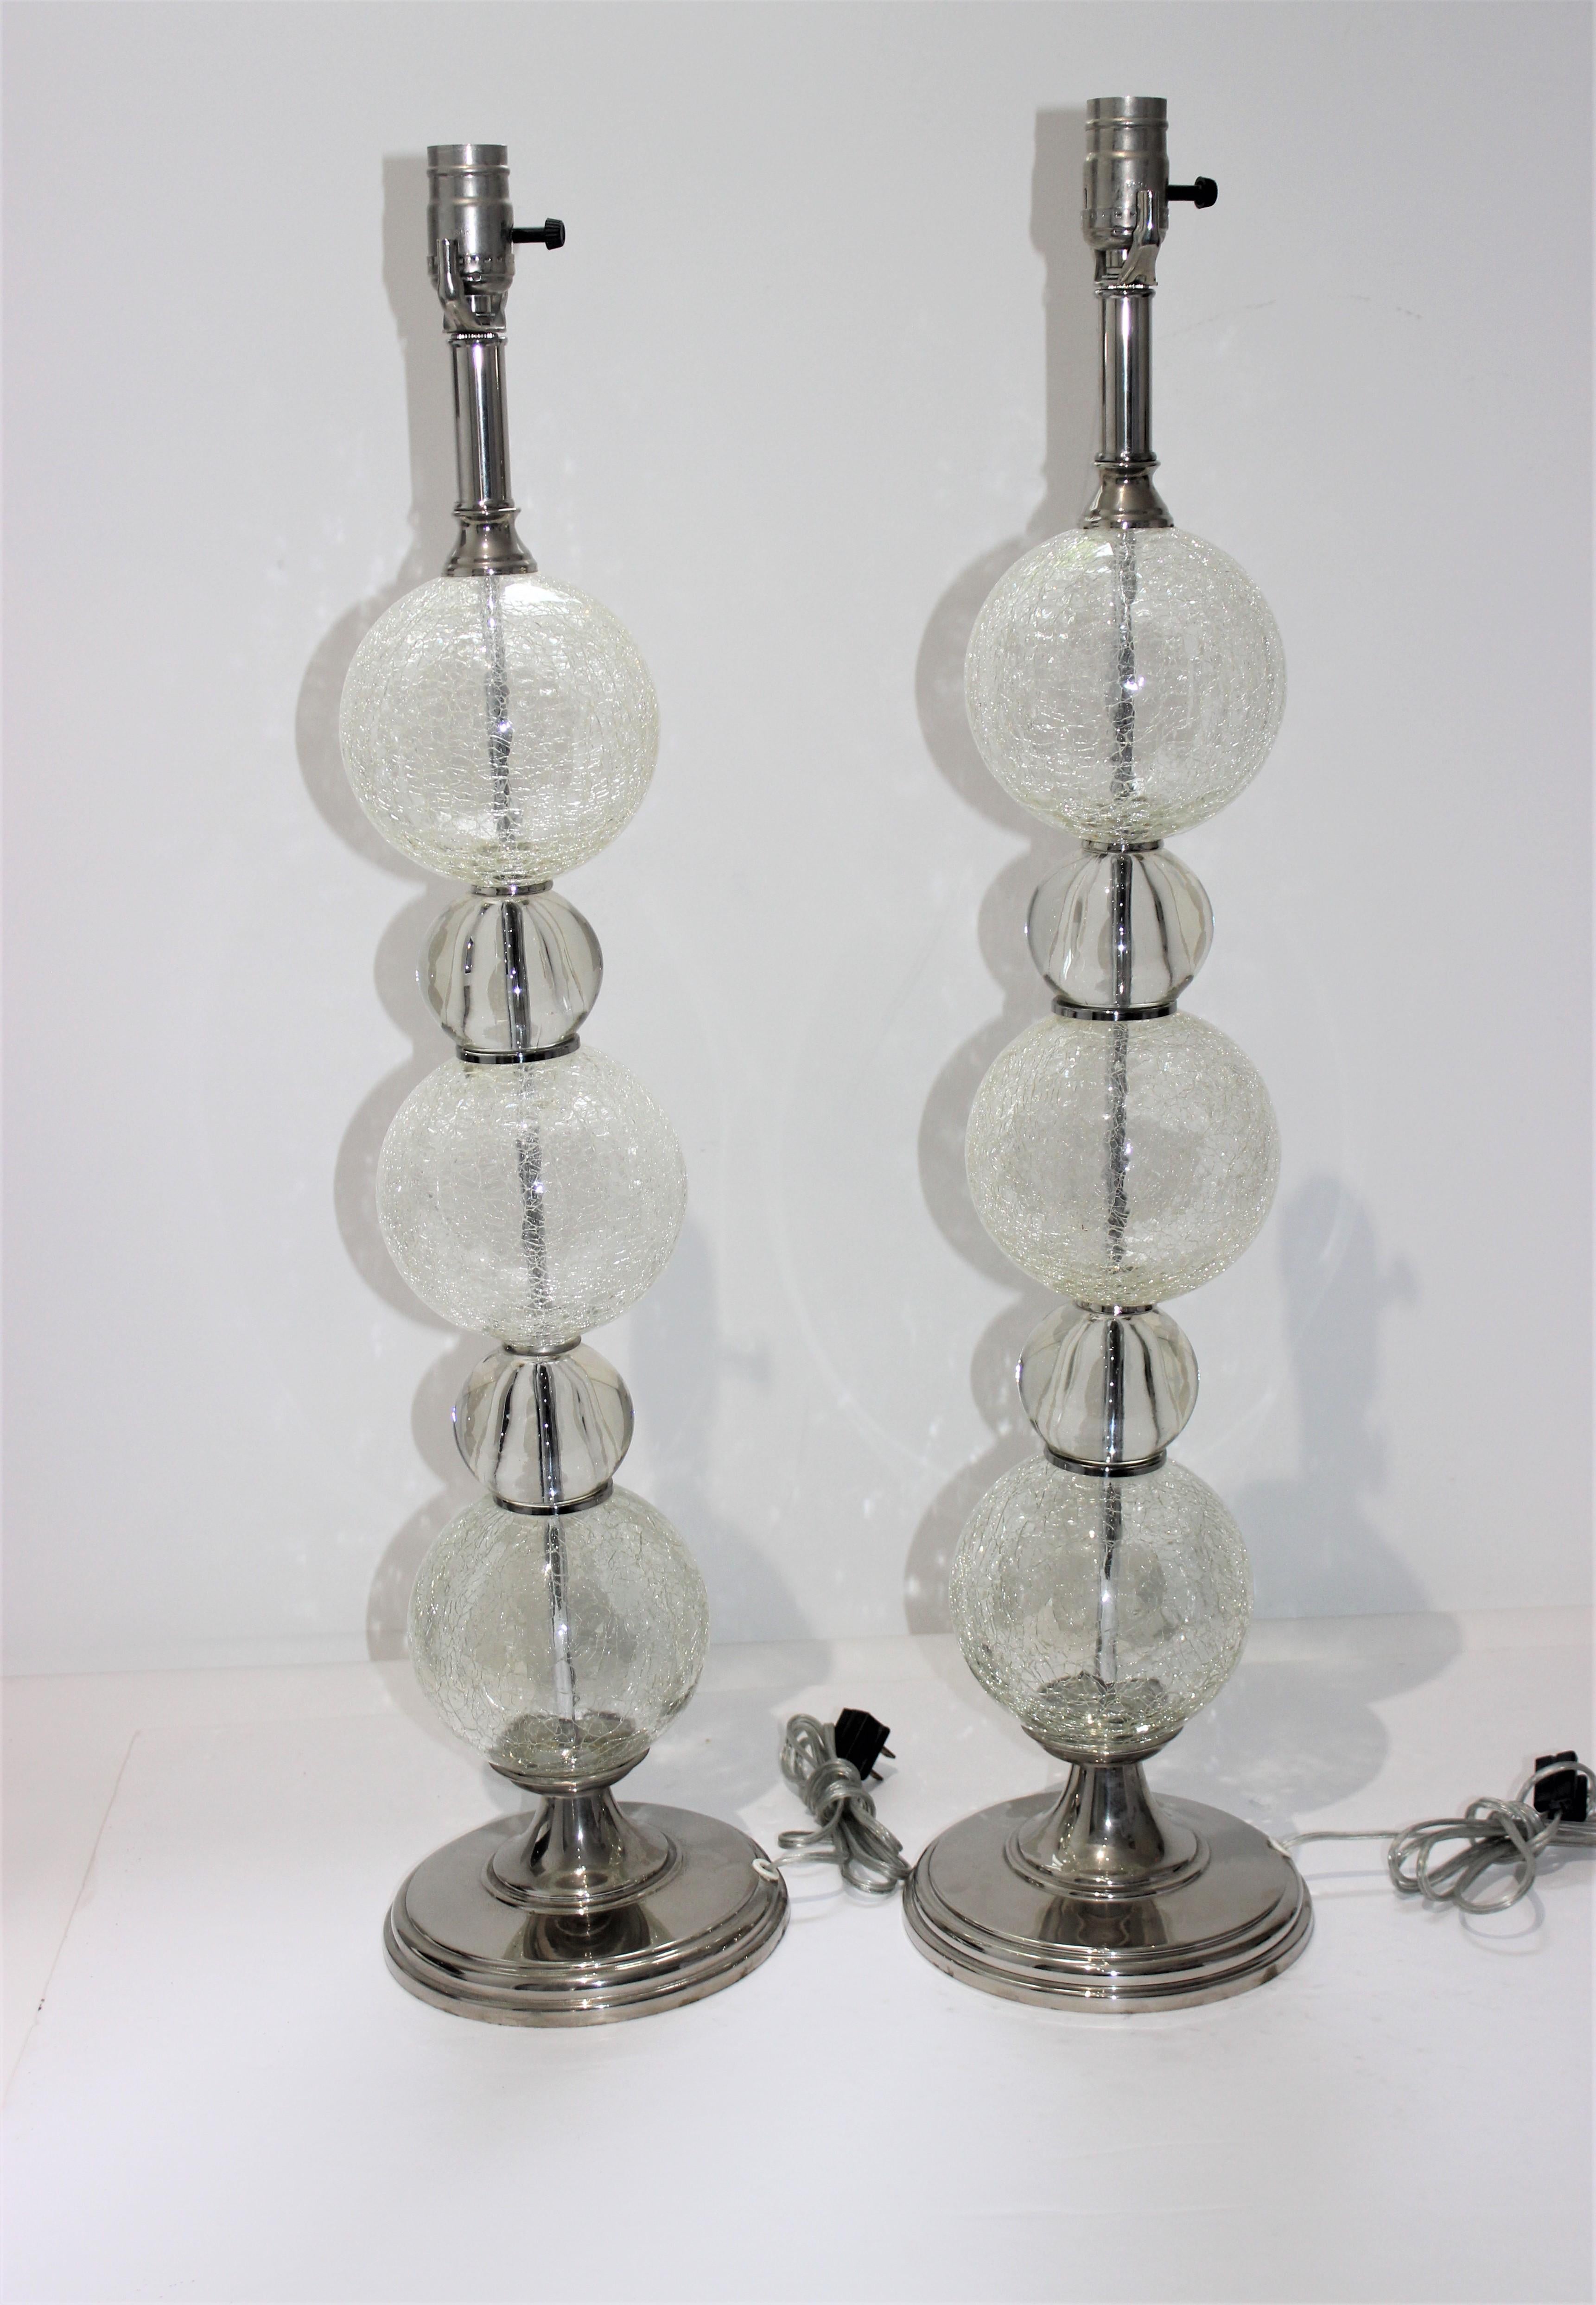 Hand-Crafted Pair of Murano Glass Table Lamps